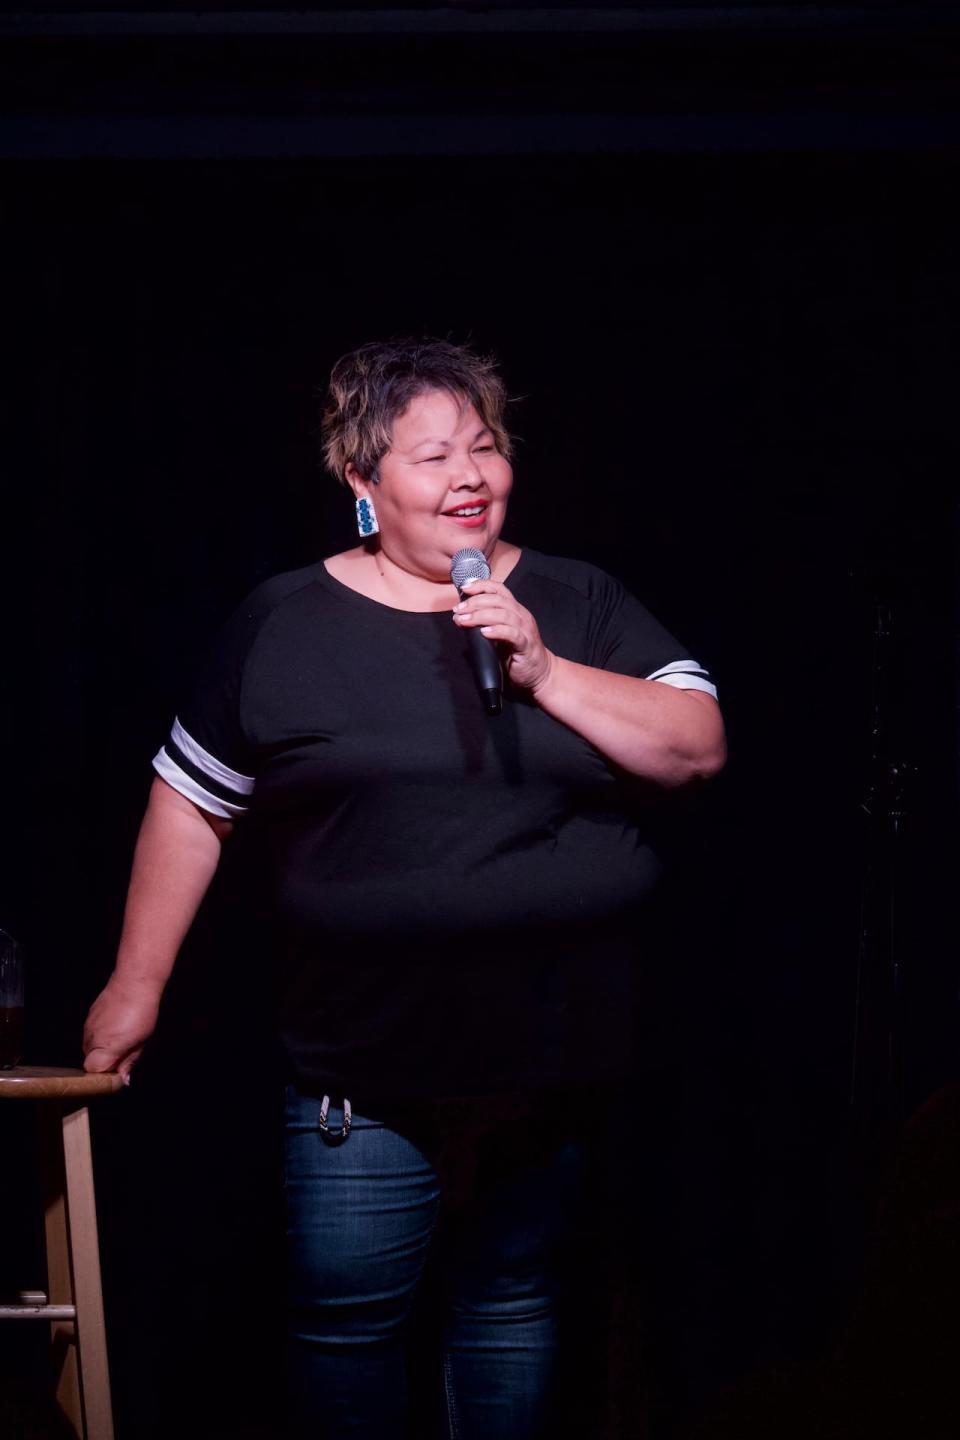 Annie Brass is the host of the Hillbilly Boogie Music Festival and was named on CBC’s Top 100 Comics to watch in 2019.